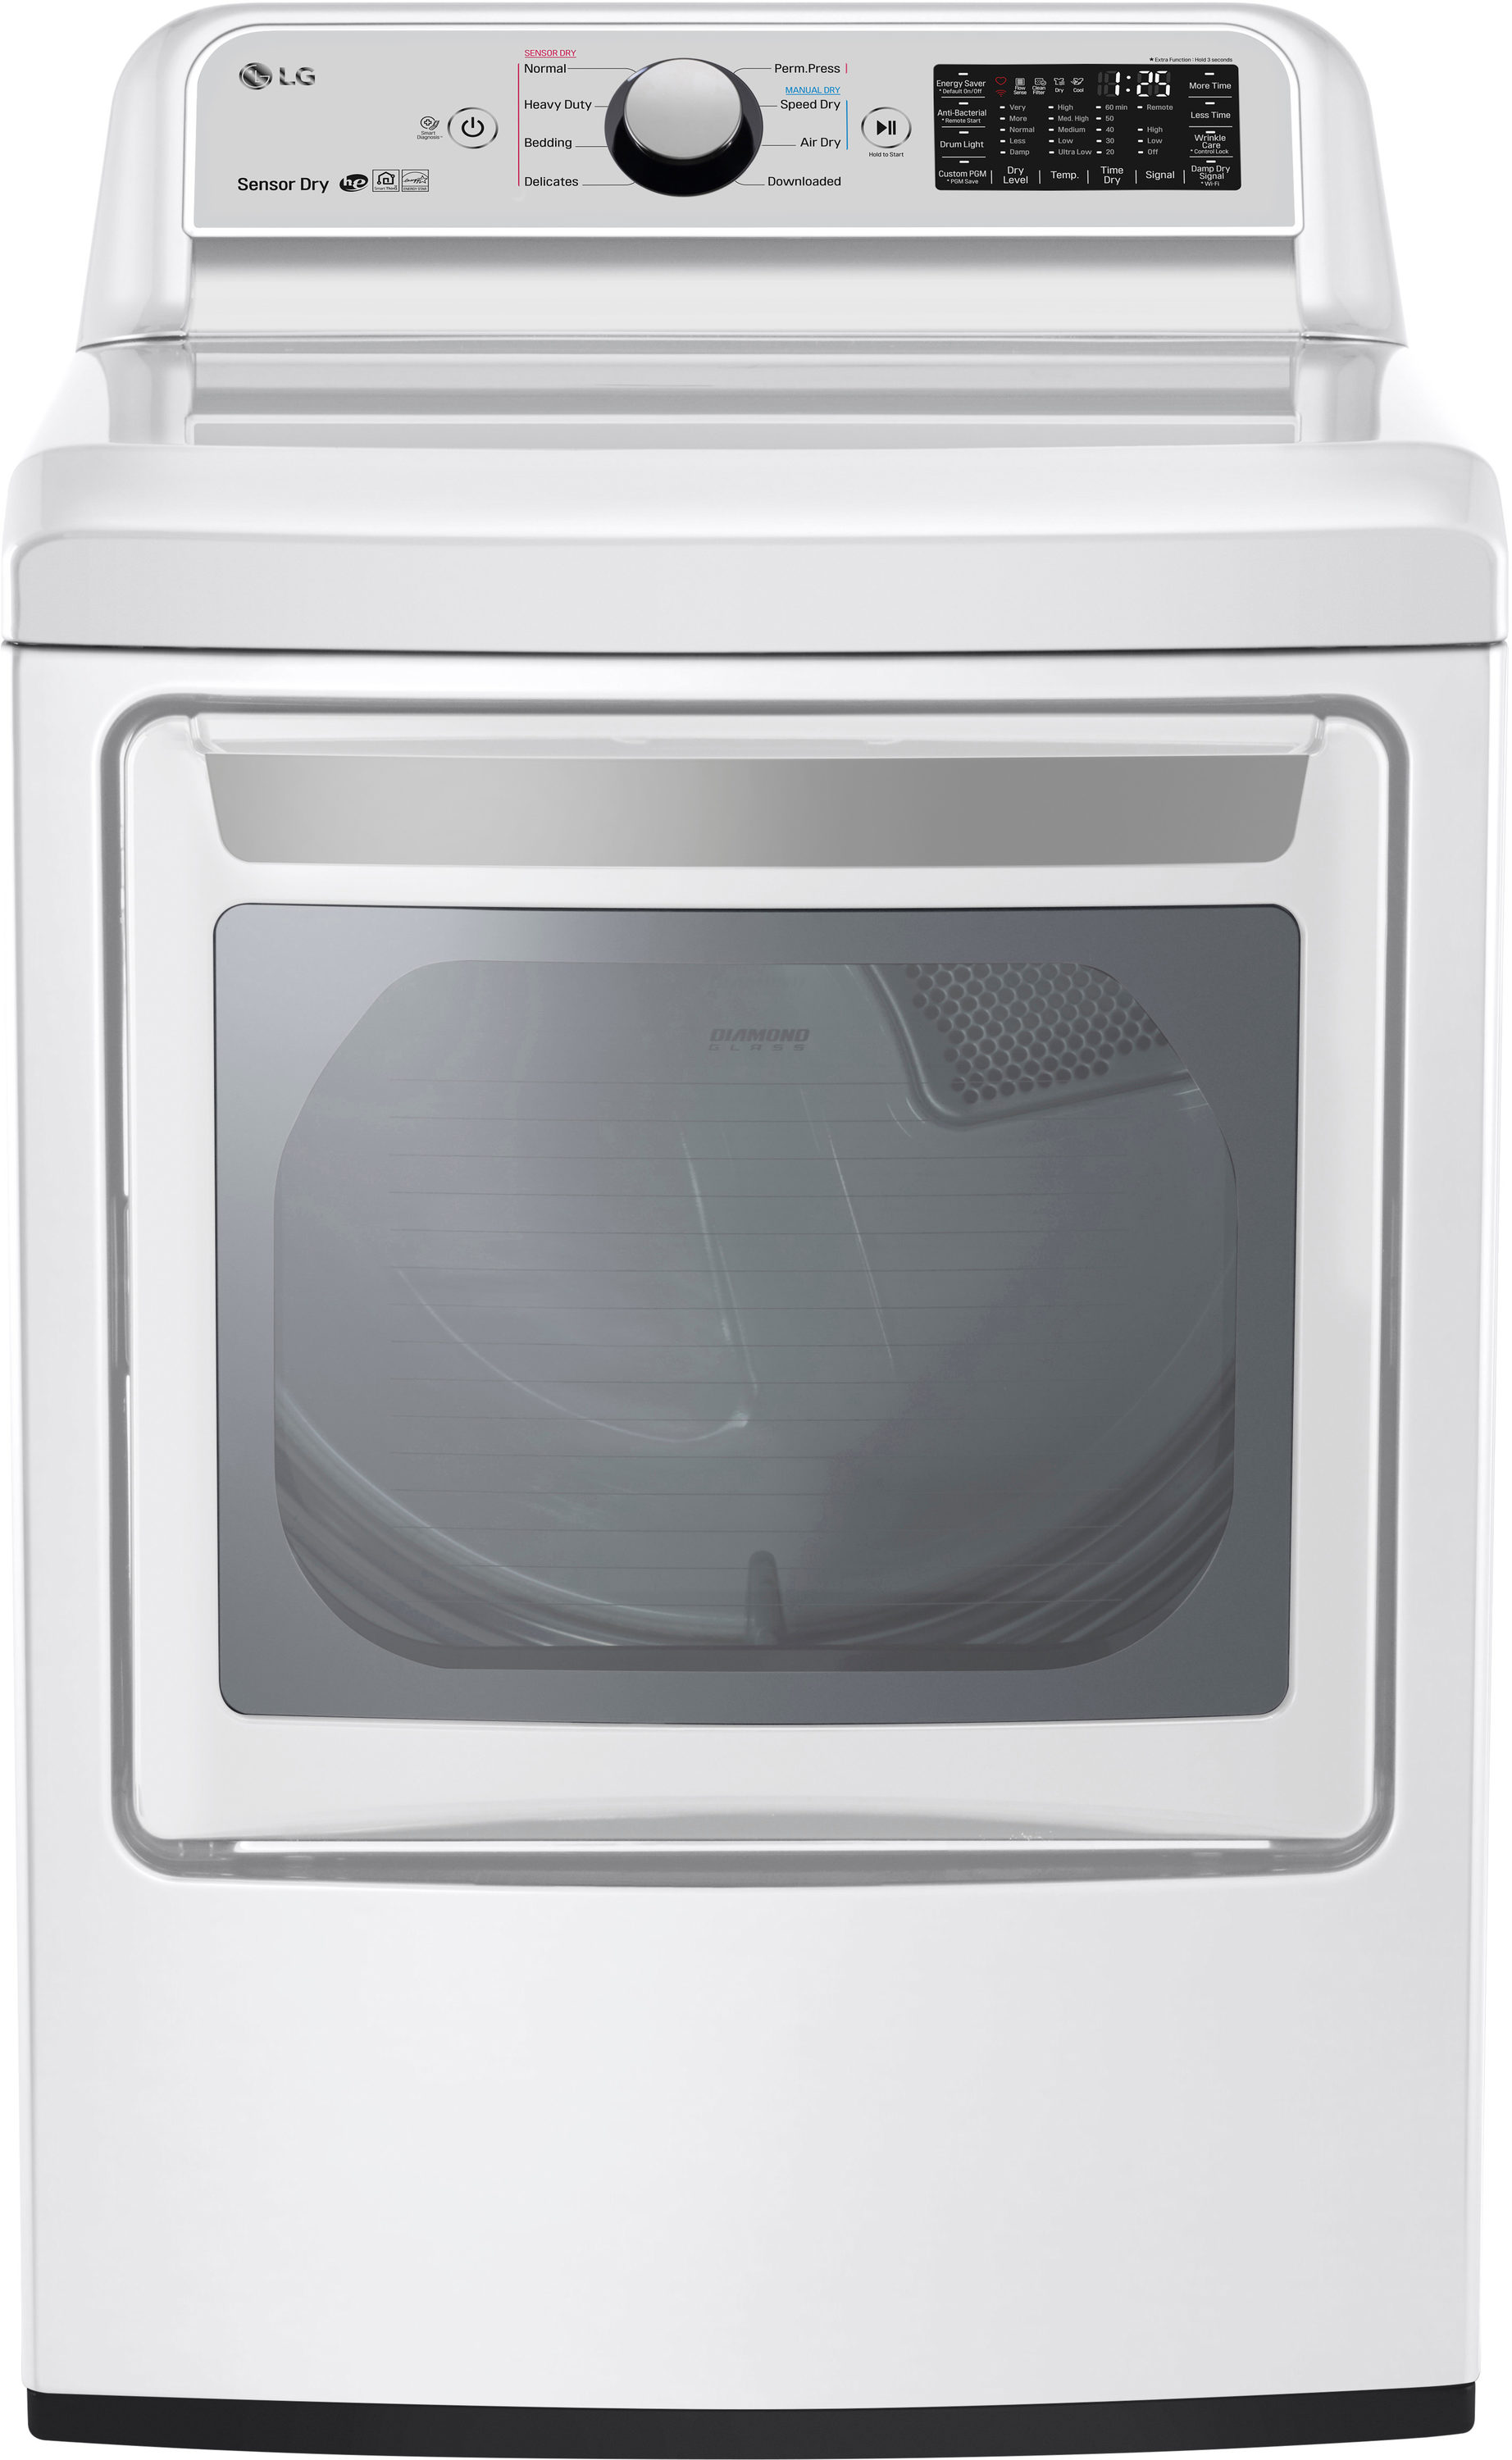 EasyLoad Smart Wi-Fi Enabled 7.3-cu ft Smart Electric Dryer (White) ENERGY STAR | - LG DLE7300WE